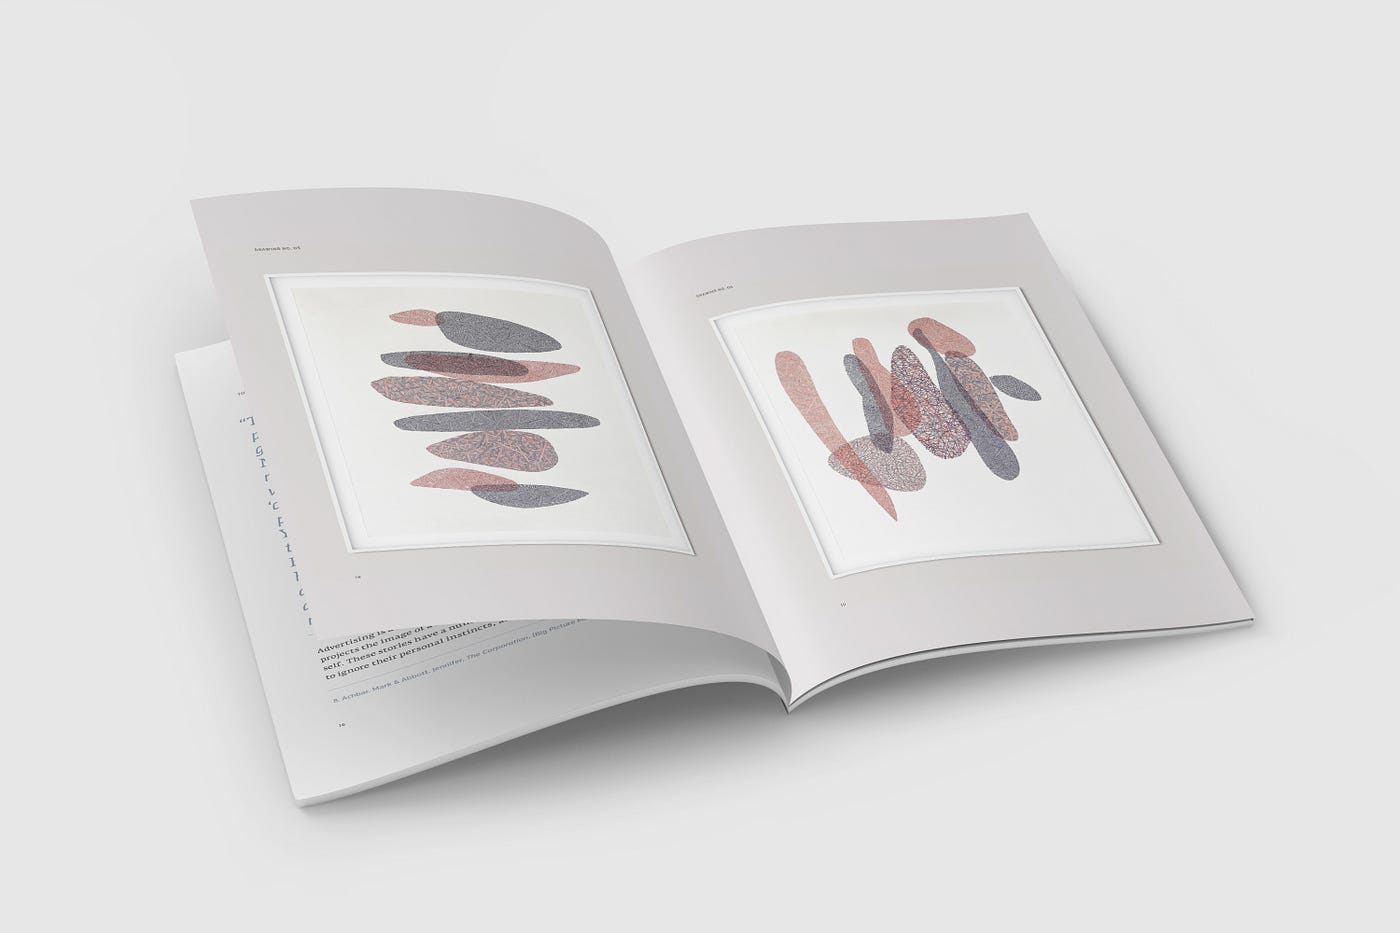 Interior book spread featuring Drawing №5 on left page and featuring Drawing №6 on right page